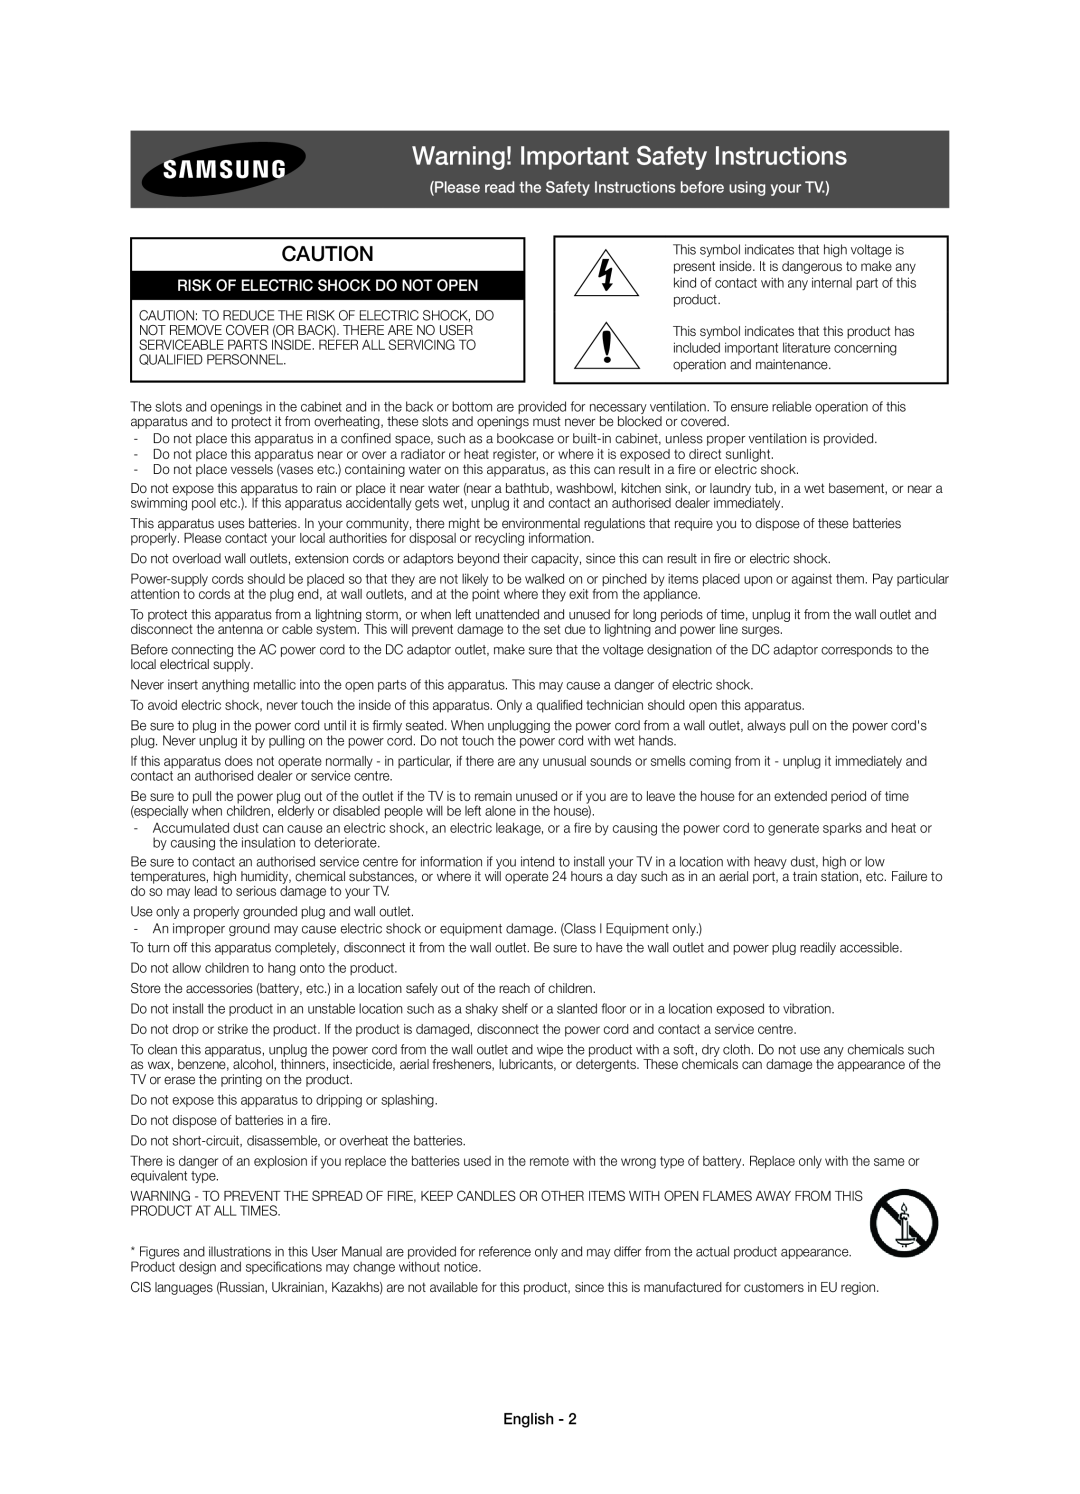 Samsung UE78JS9500TXZF Warning! Important Safety Instructions, Please read the Safety Instructions before using your TV 